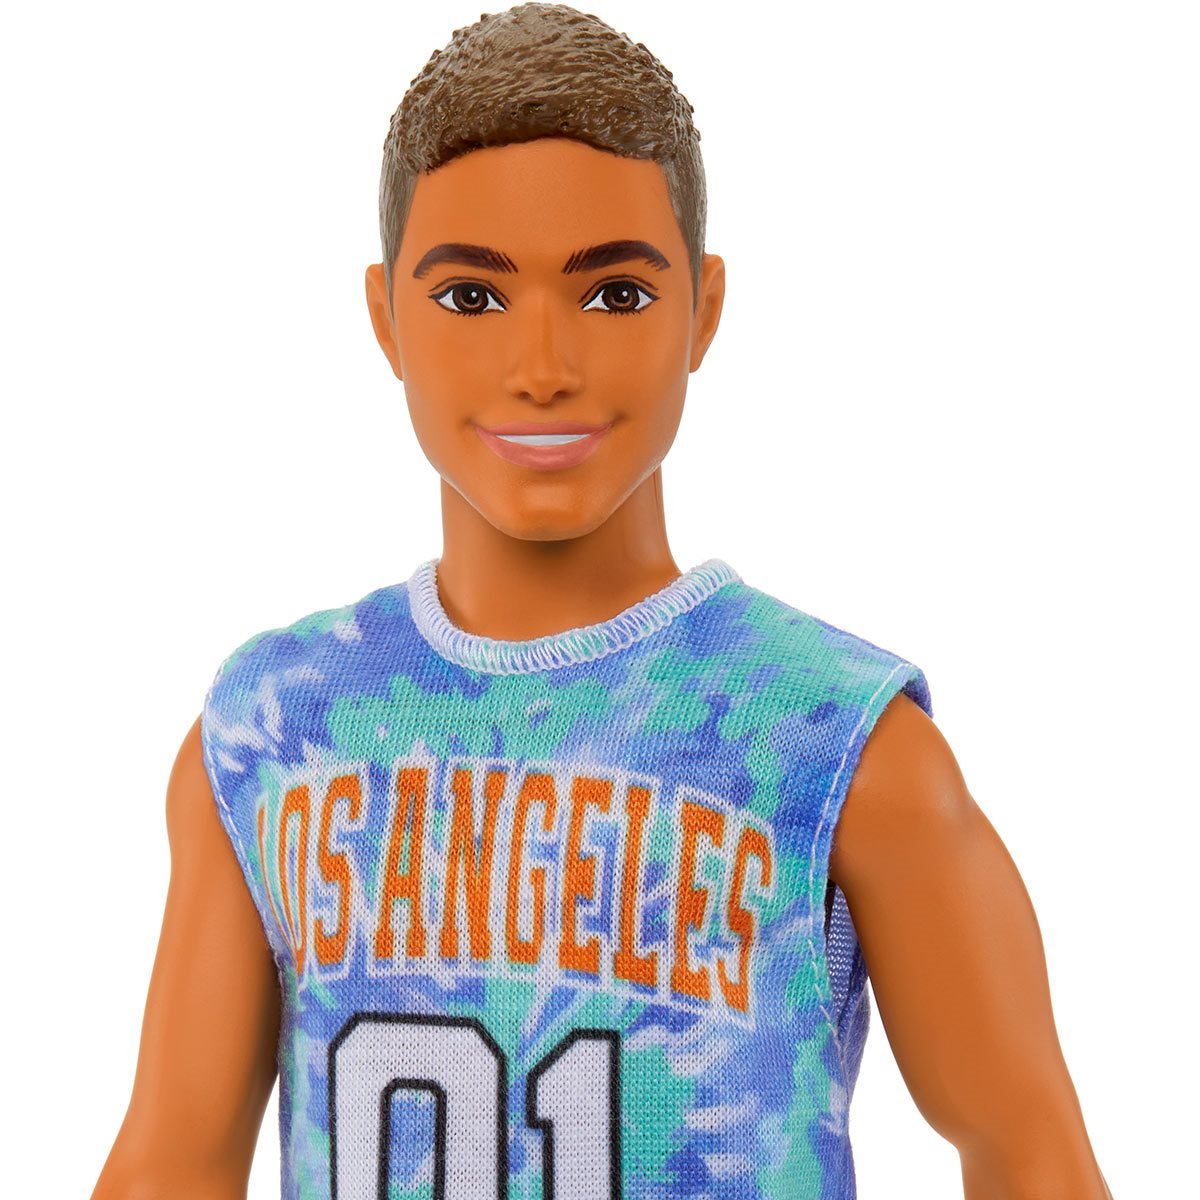 Ken Fashionista Doll #212 with Jersey